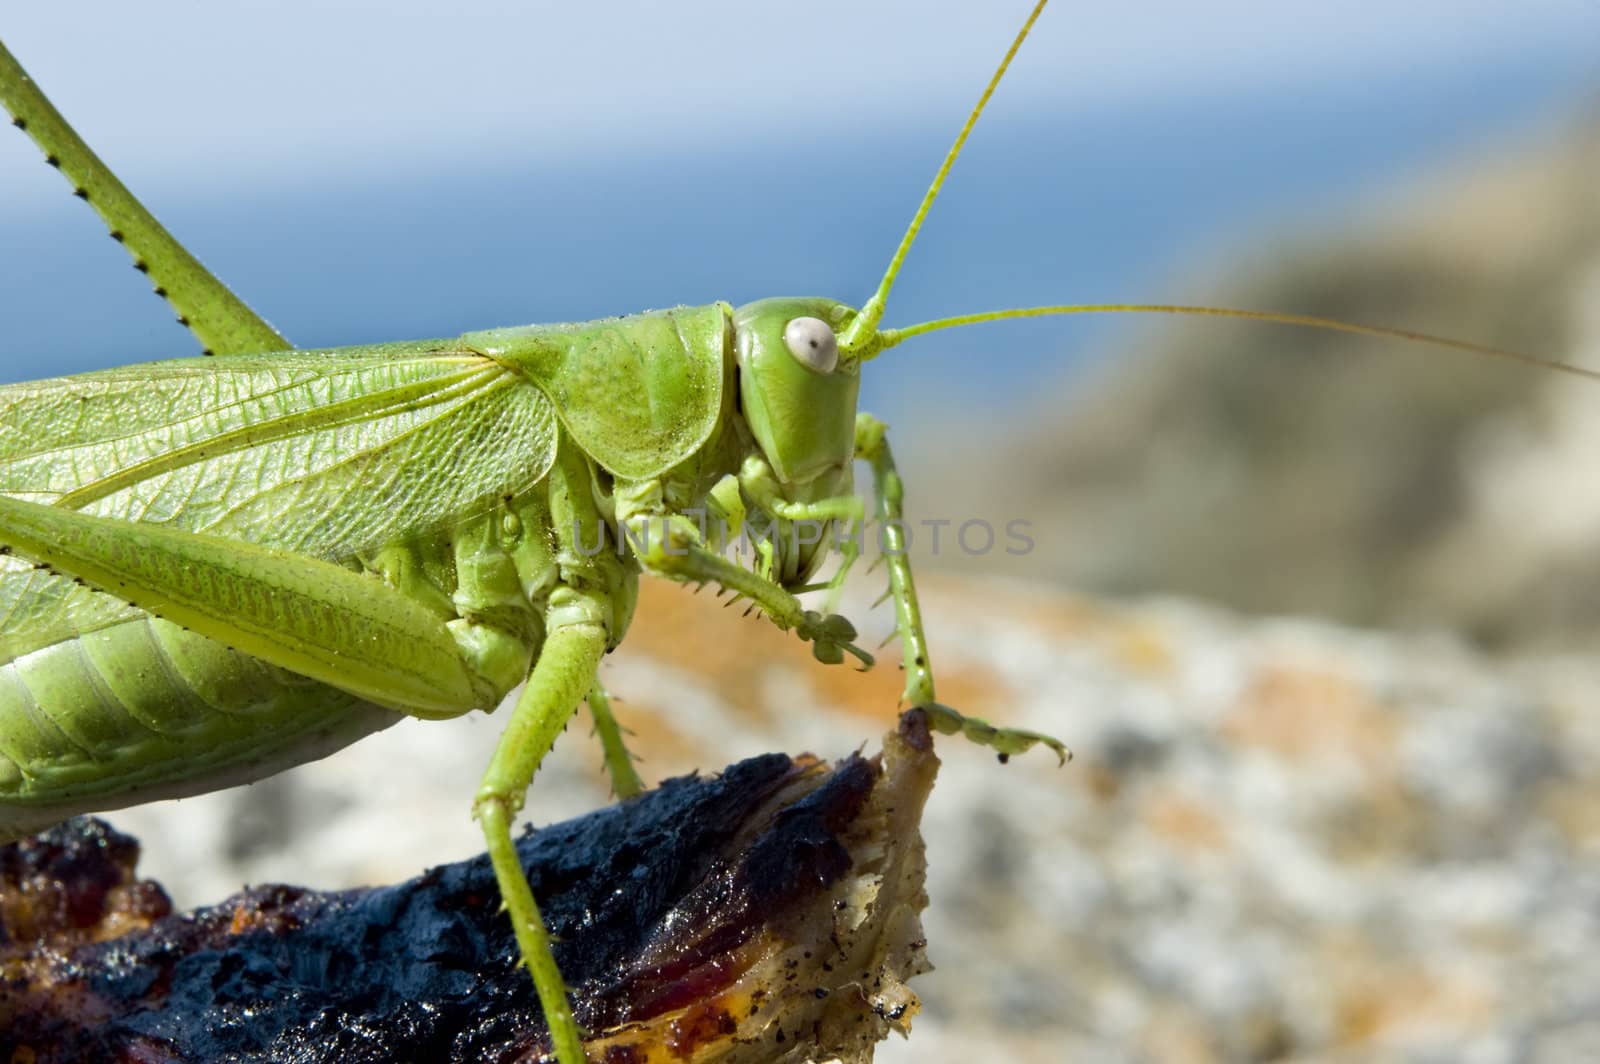 green locust eating meat by starush